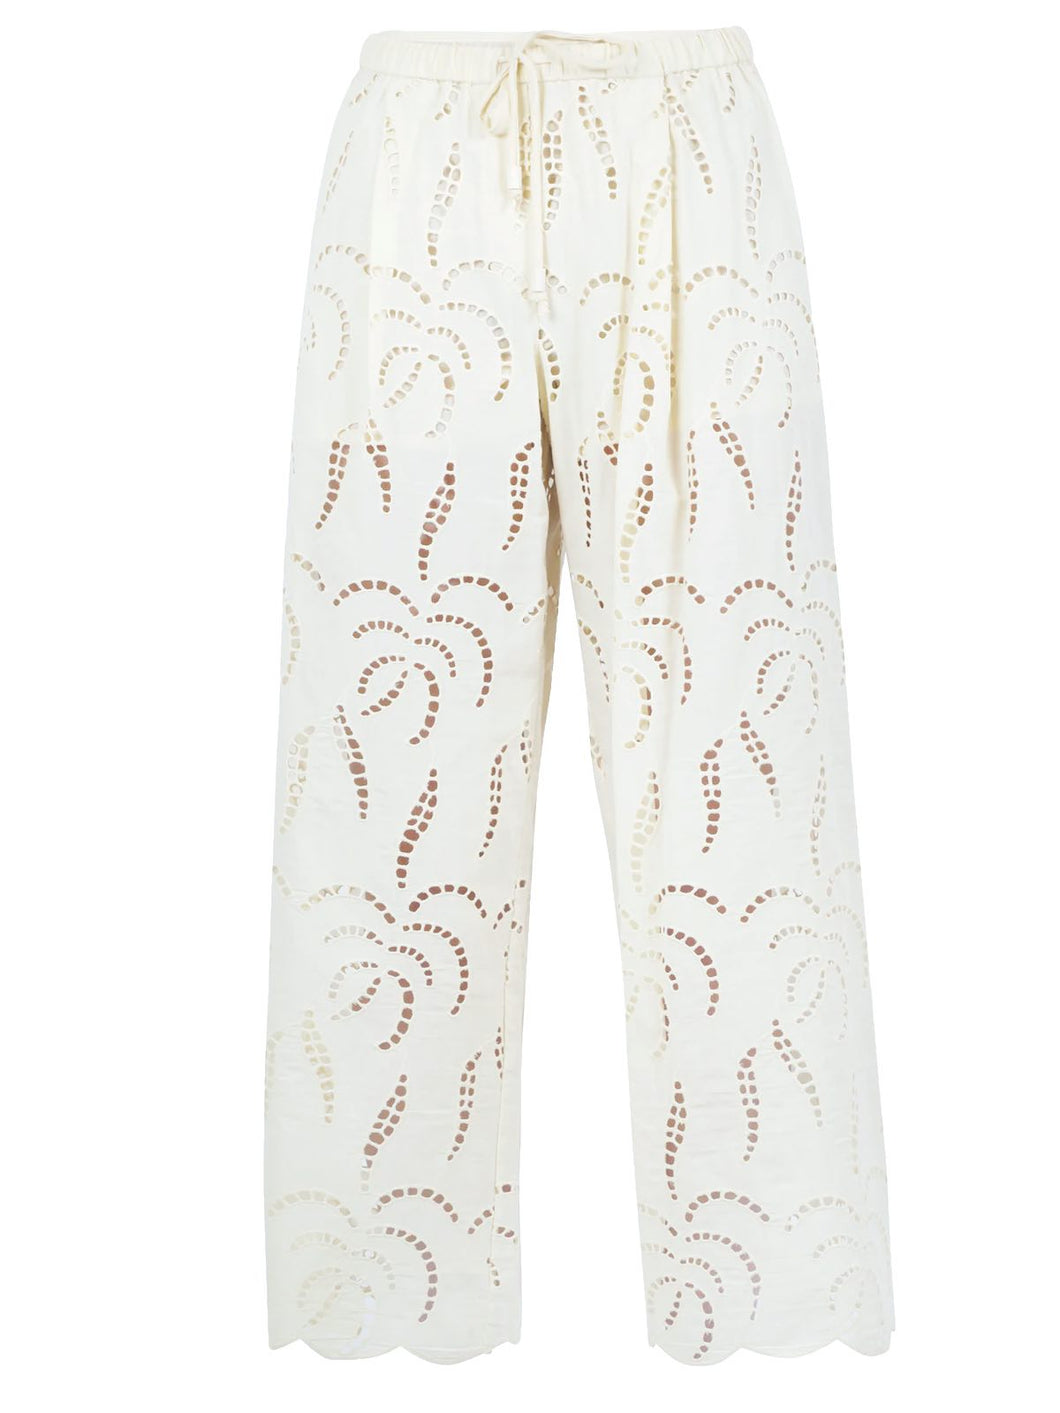 otto-d-ame-womens-broderie-anglaise-trousers-culottes-in-white